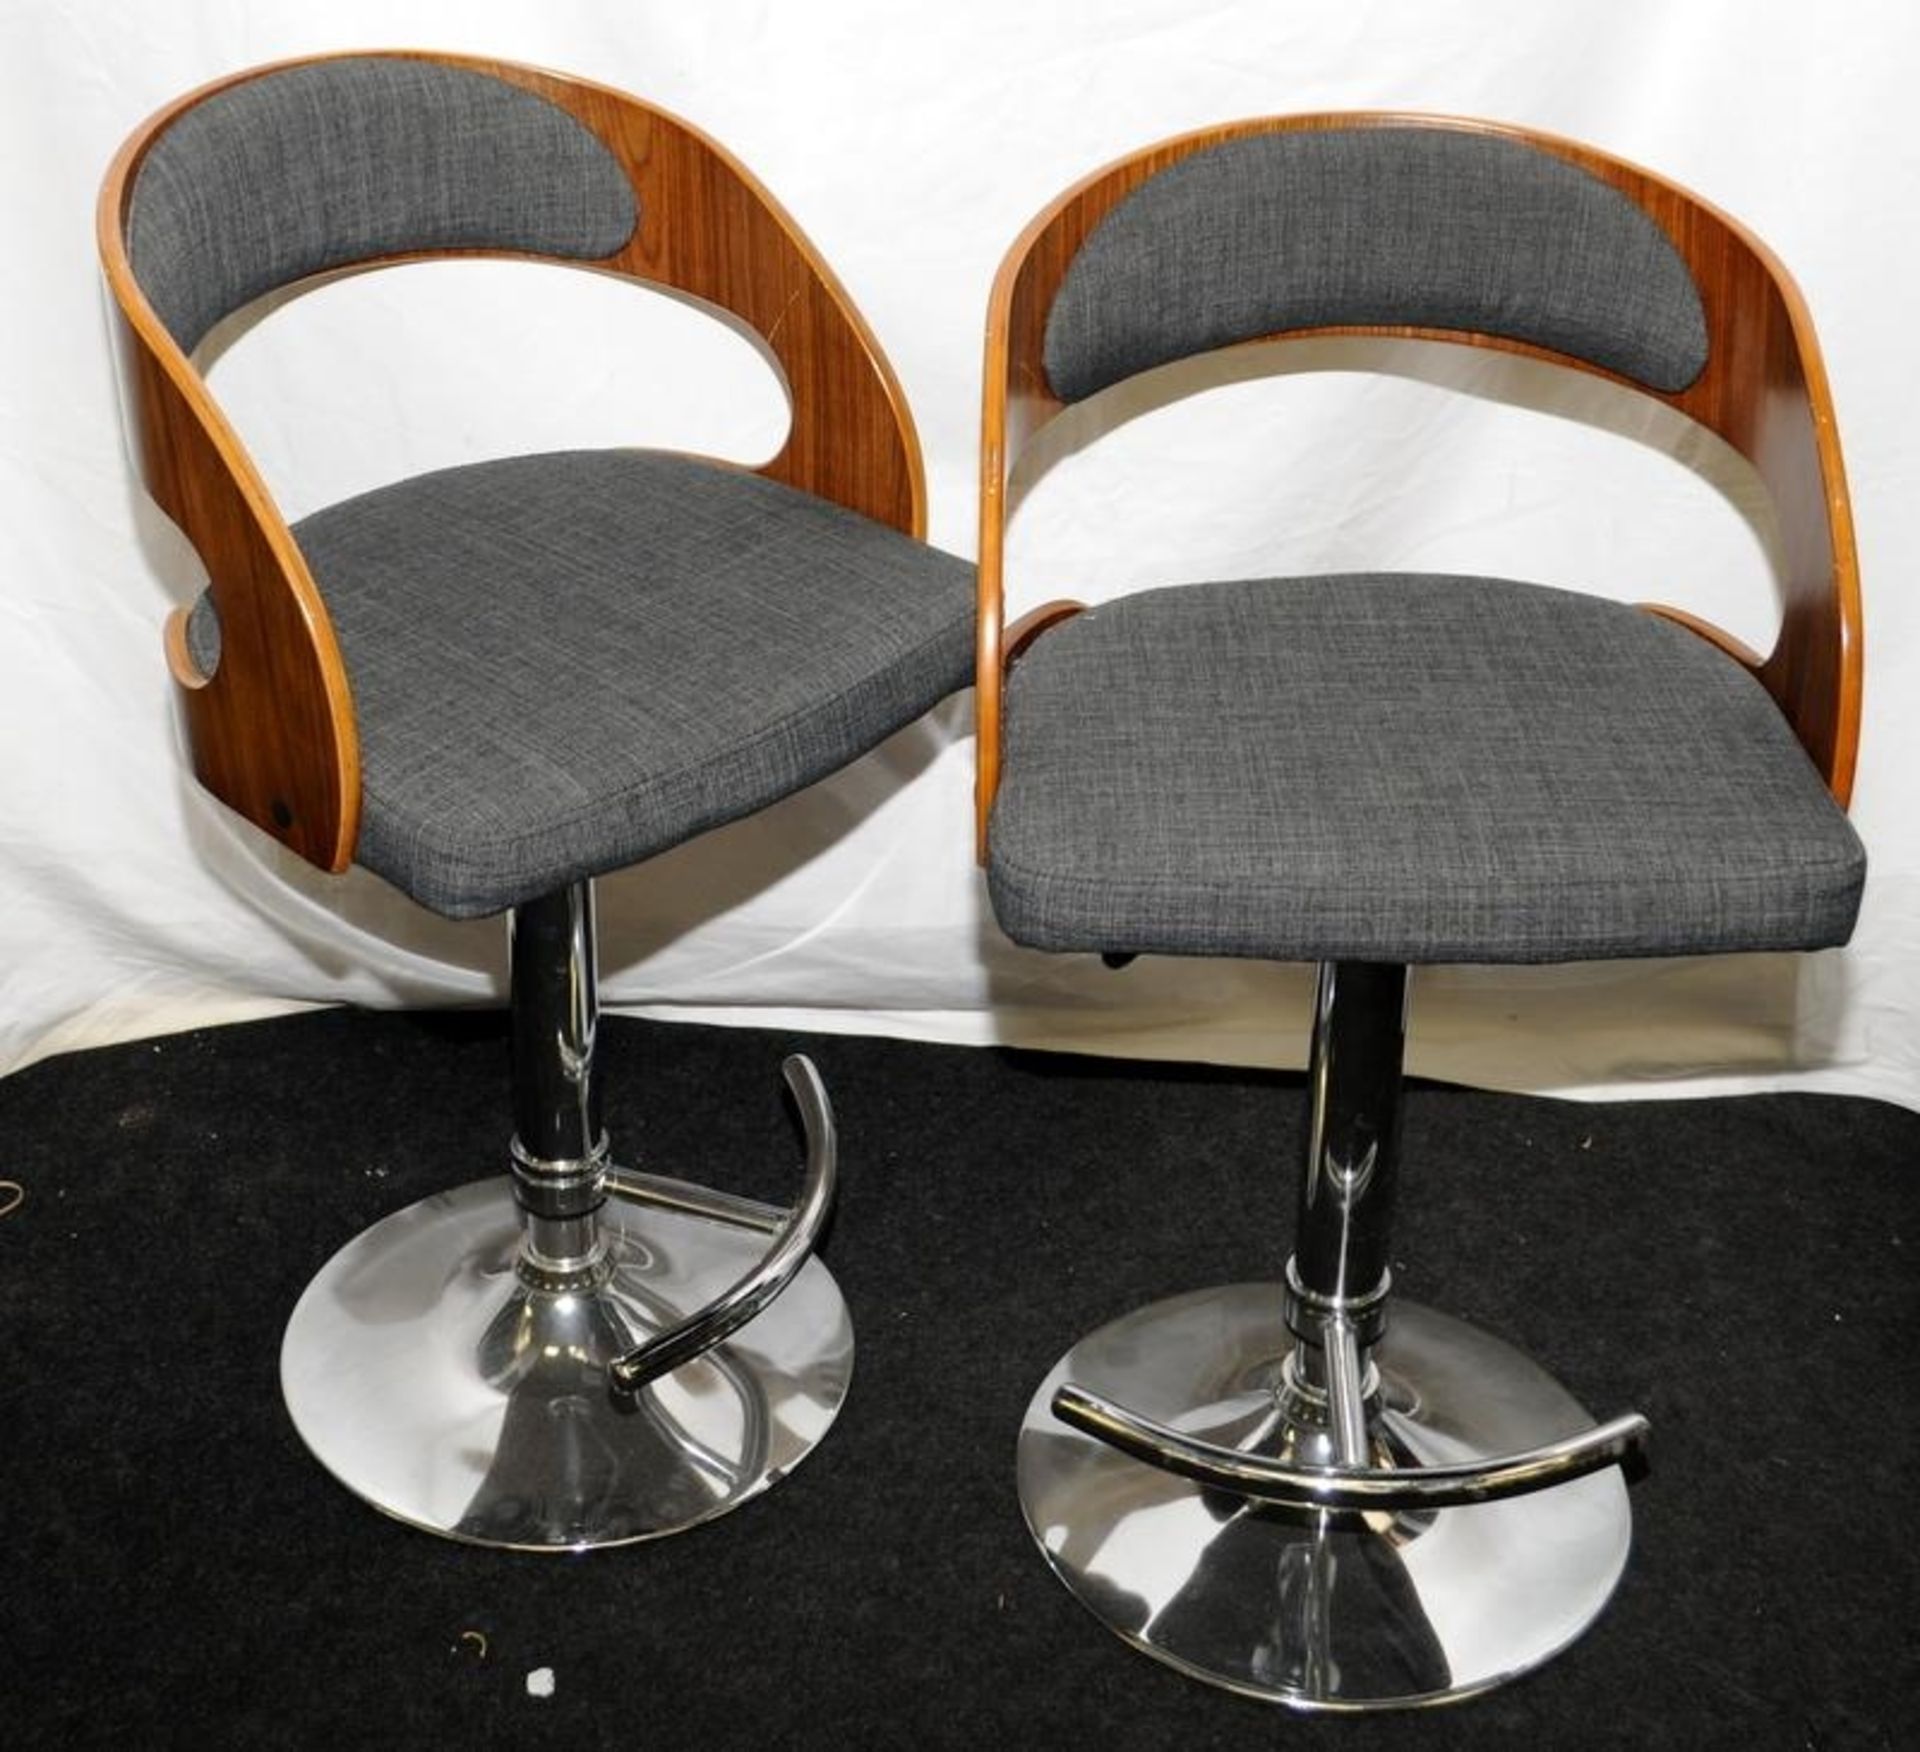 Pair of height adjustable bar stools in chrome and teak with grey upholstery.